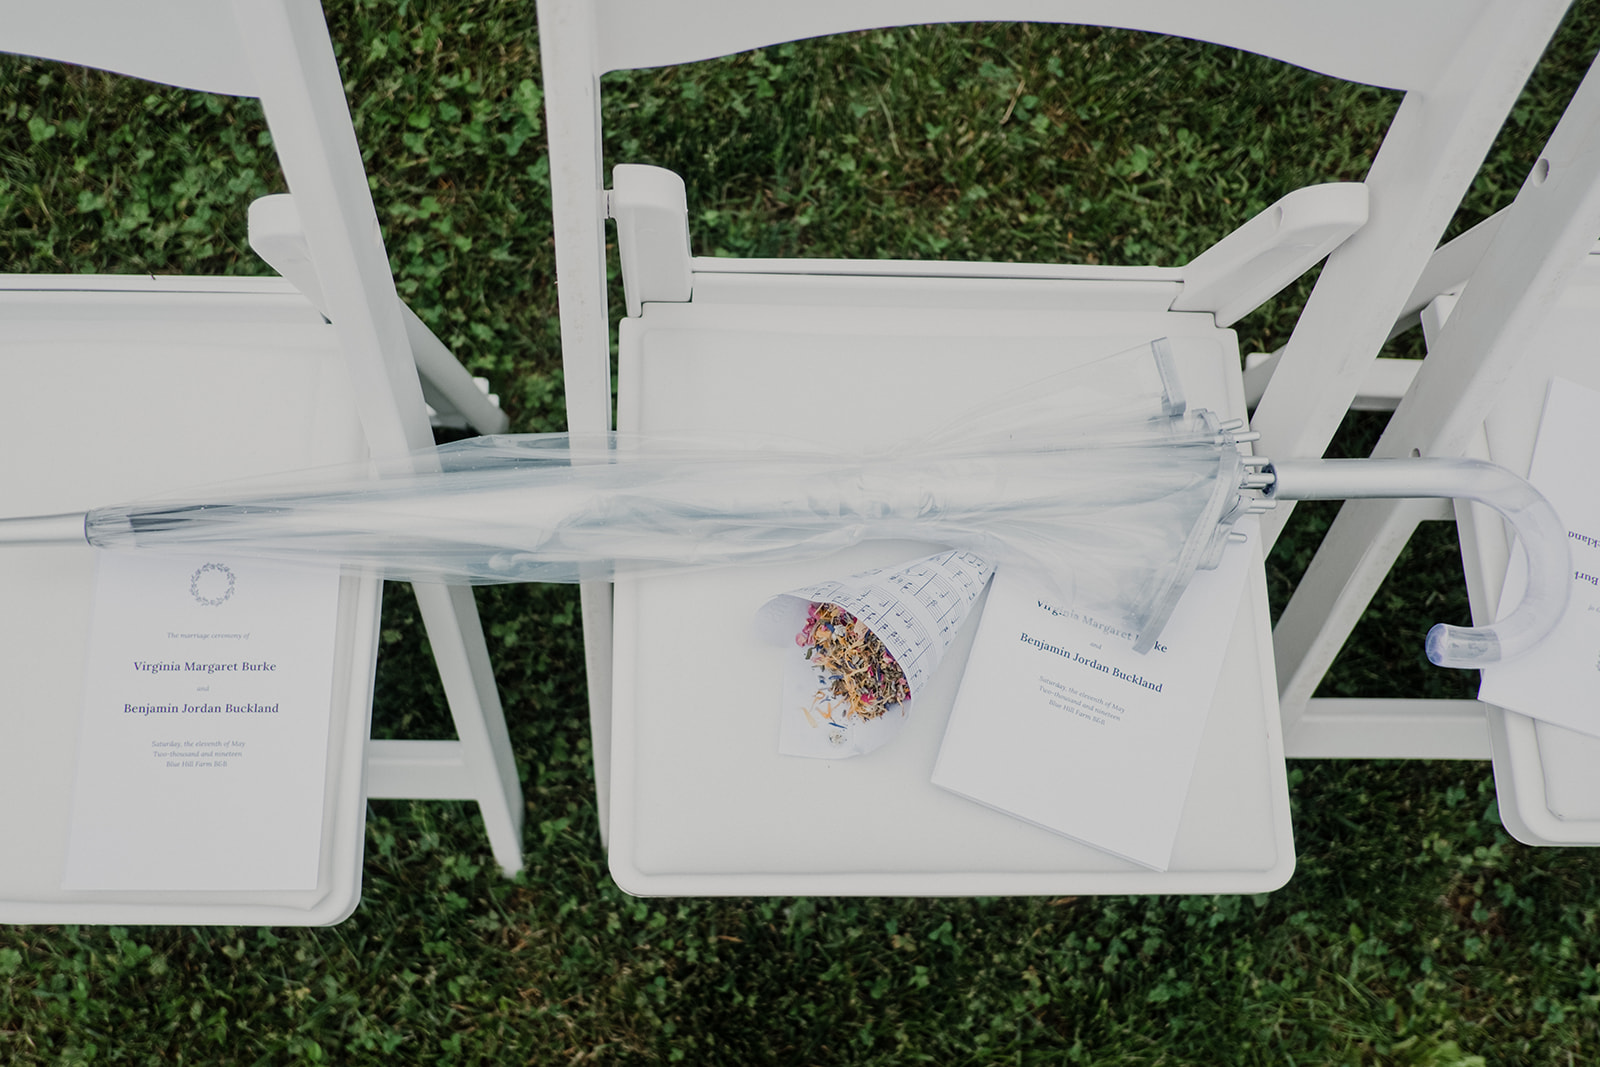 An umbrella sits next to the programs at an outdoor wedding ceremony at Blue Hill Farm in Waterford, VA.